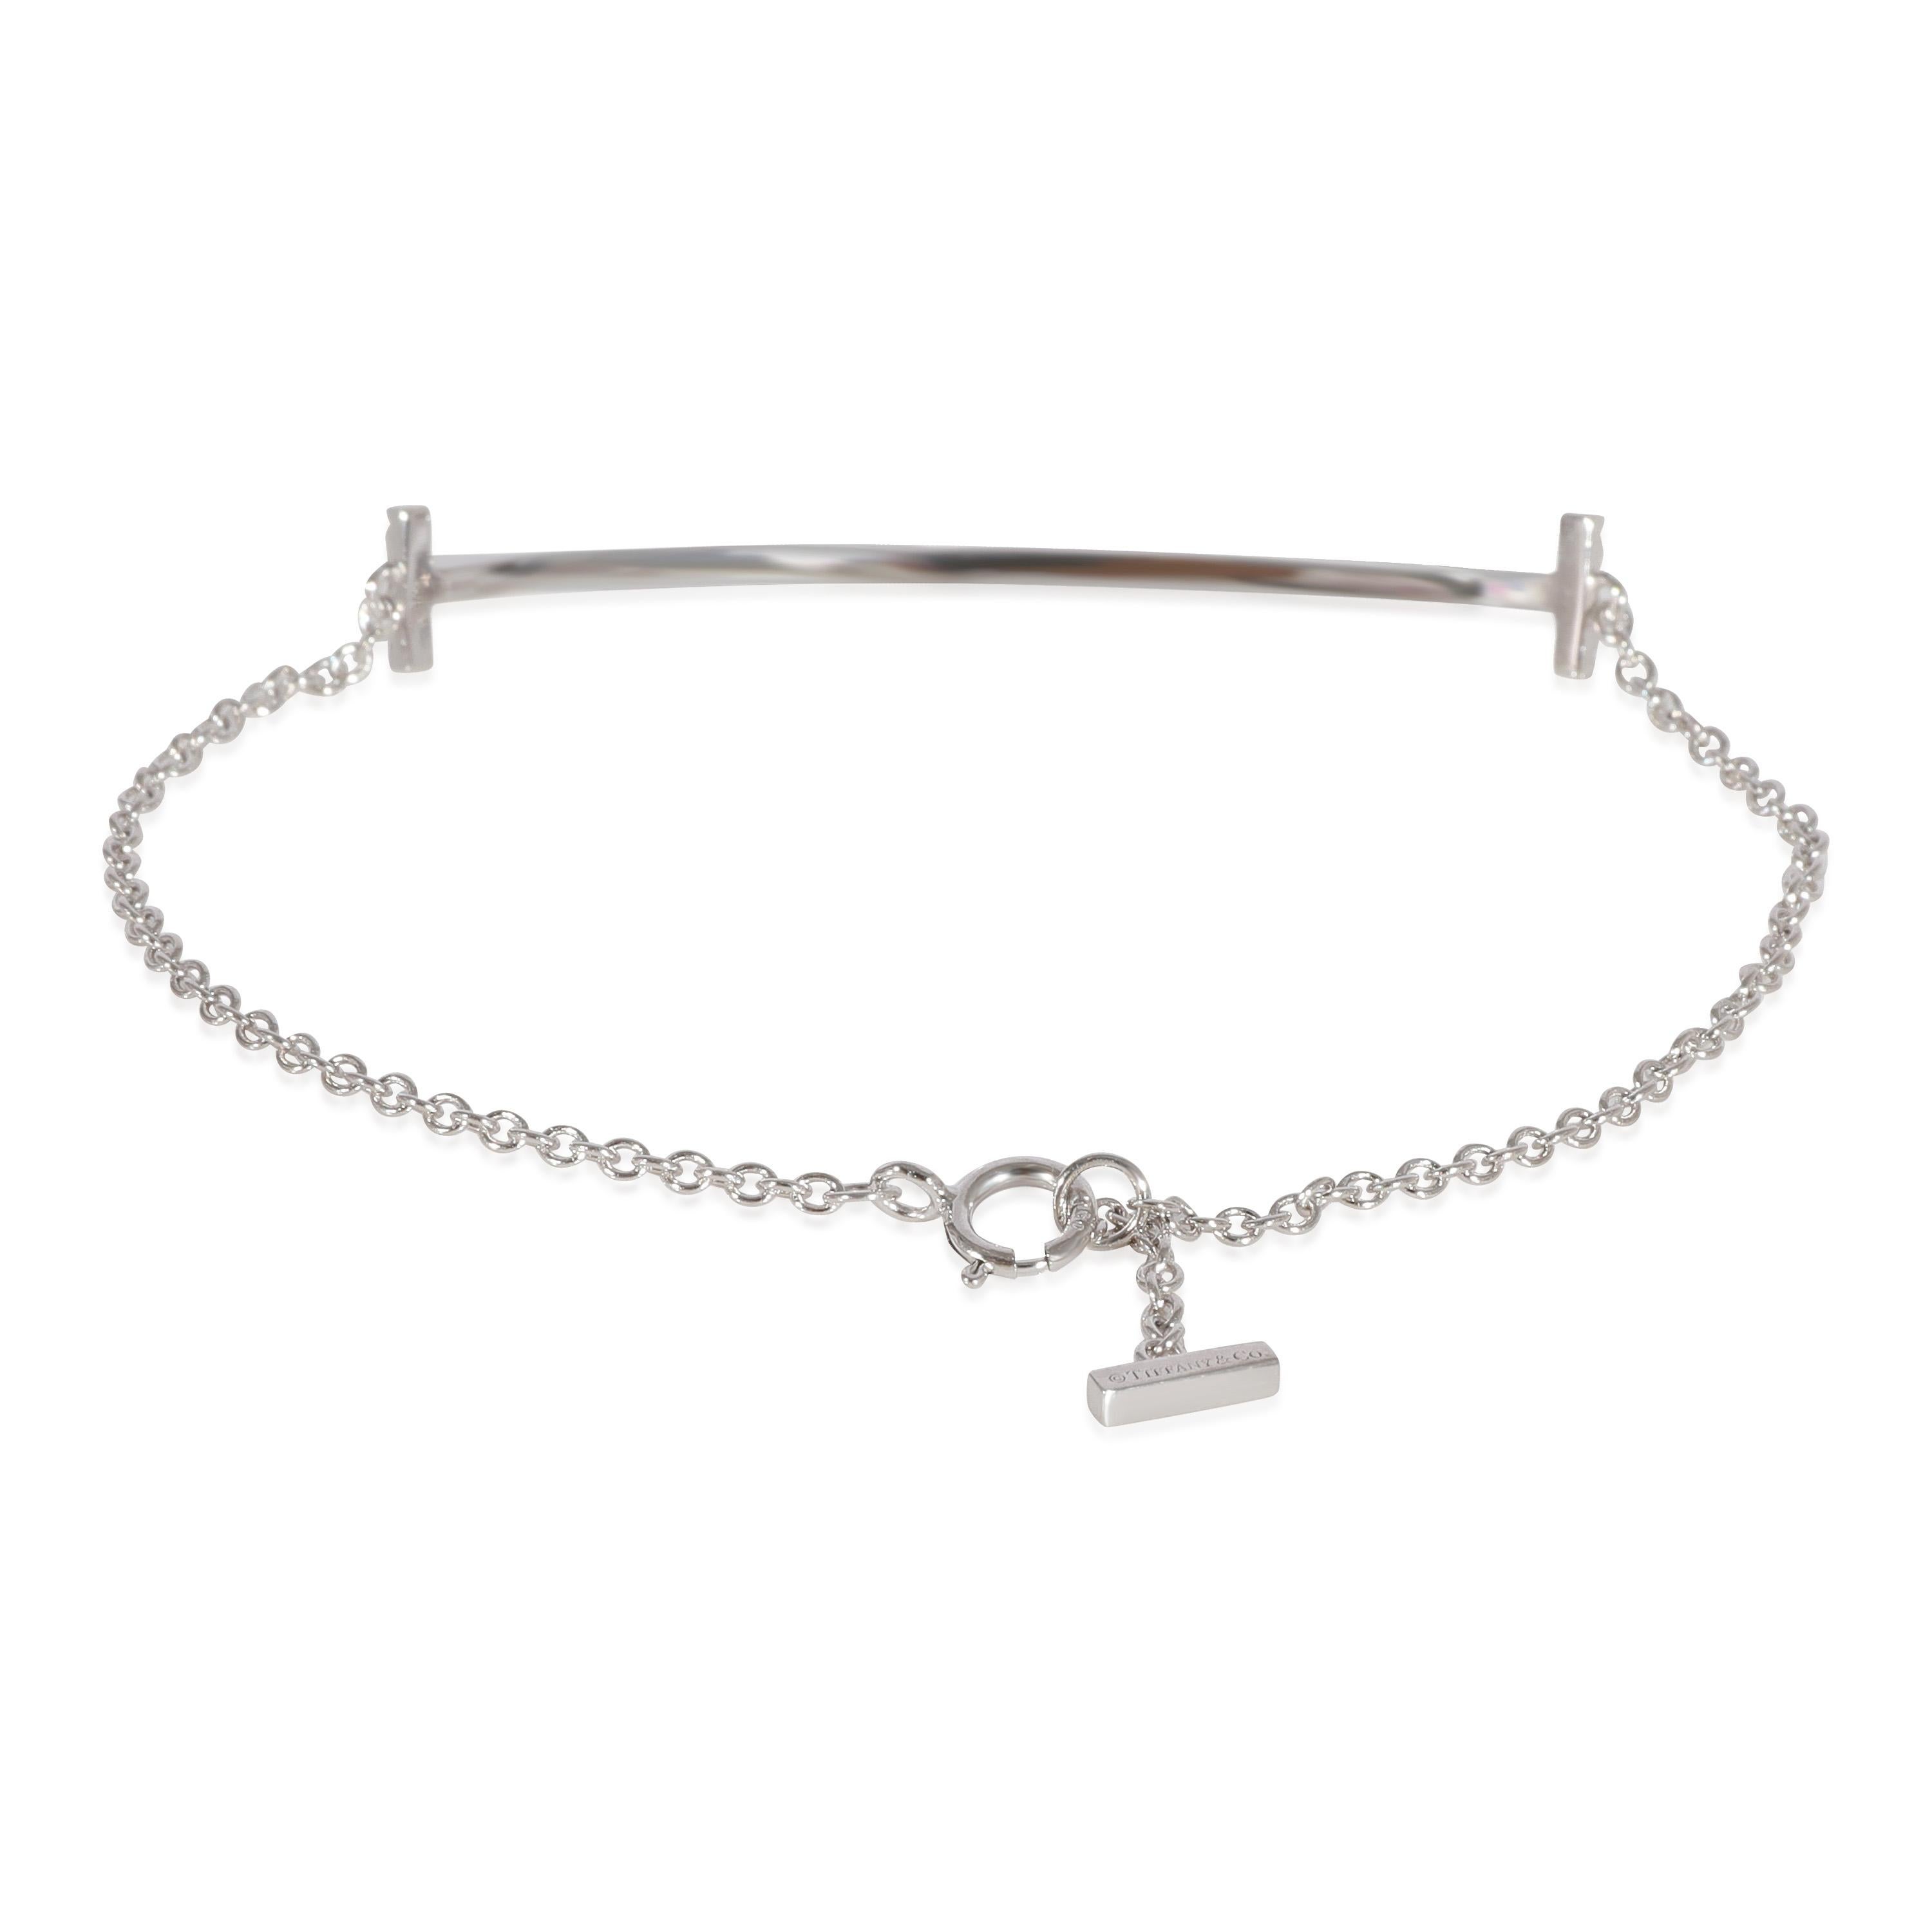 Tiffany & Co. T Smile Bracelet in 18k White Gold 0.12 CTW

PRIMARY DETAILS
SKU: 125228
Listing Title: Tiffany & Co. T Smile Bracelet in 18k White Gold 0.12 CTW
Condition Description: Retails for 2700 USD. In excellent condition and recently